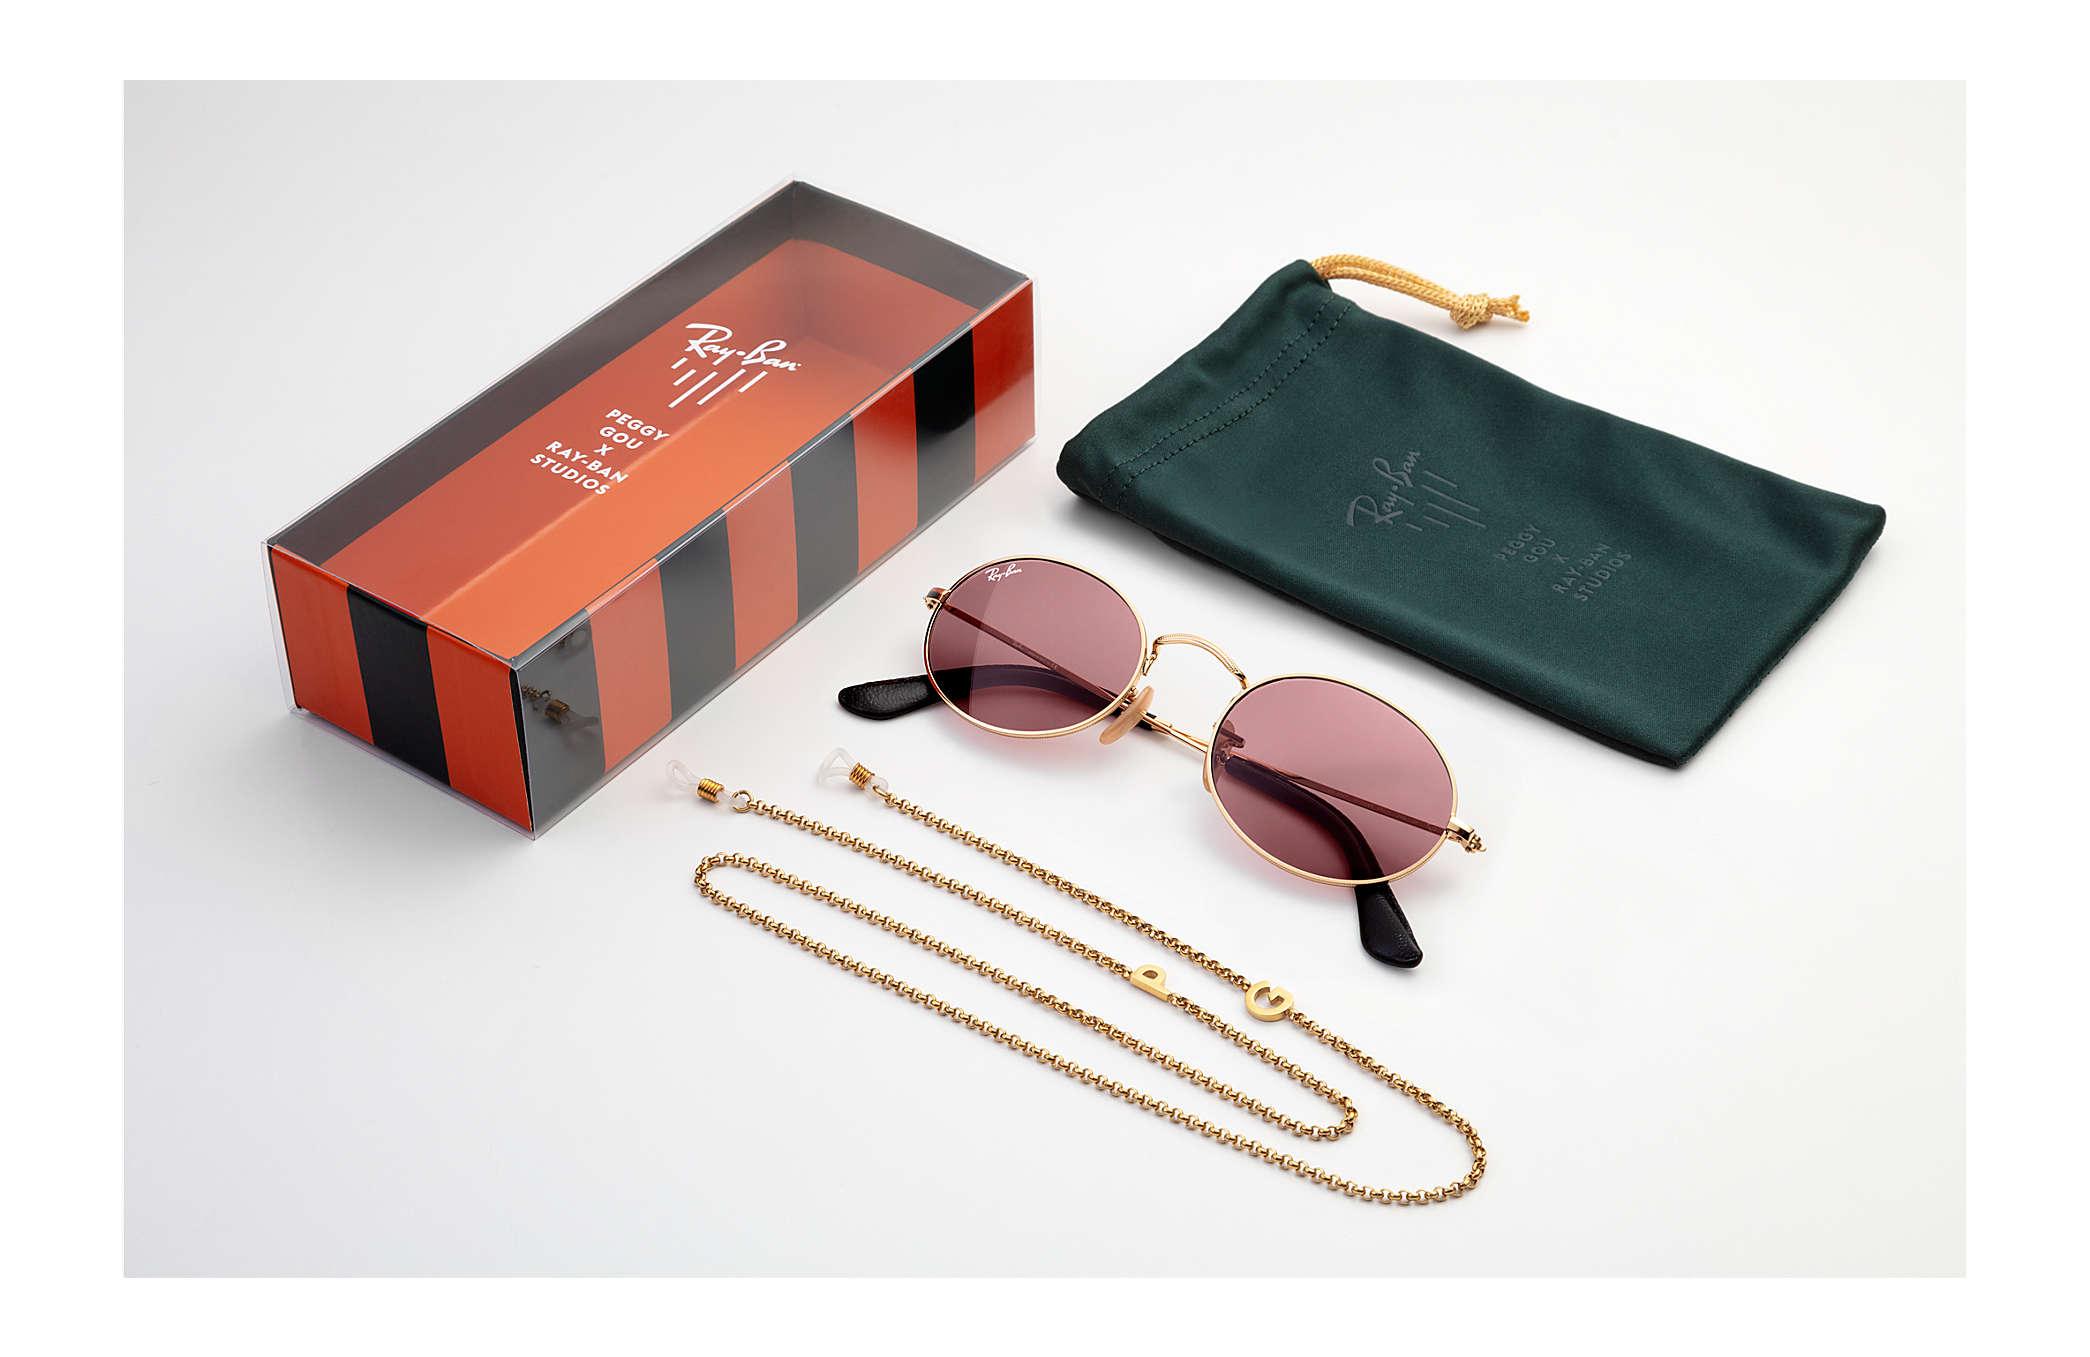 ray ban oval peggy gou